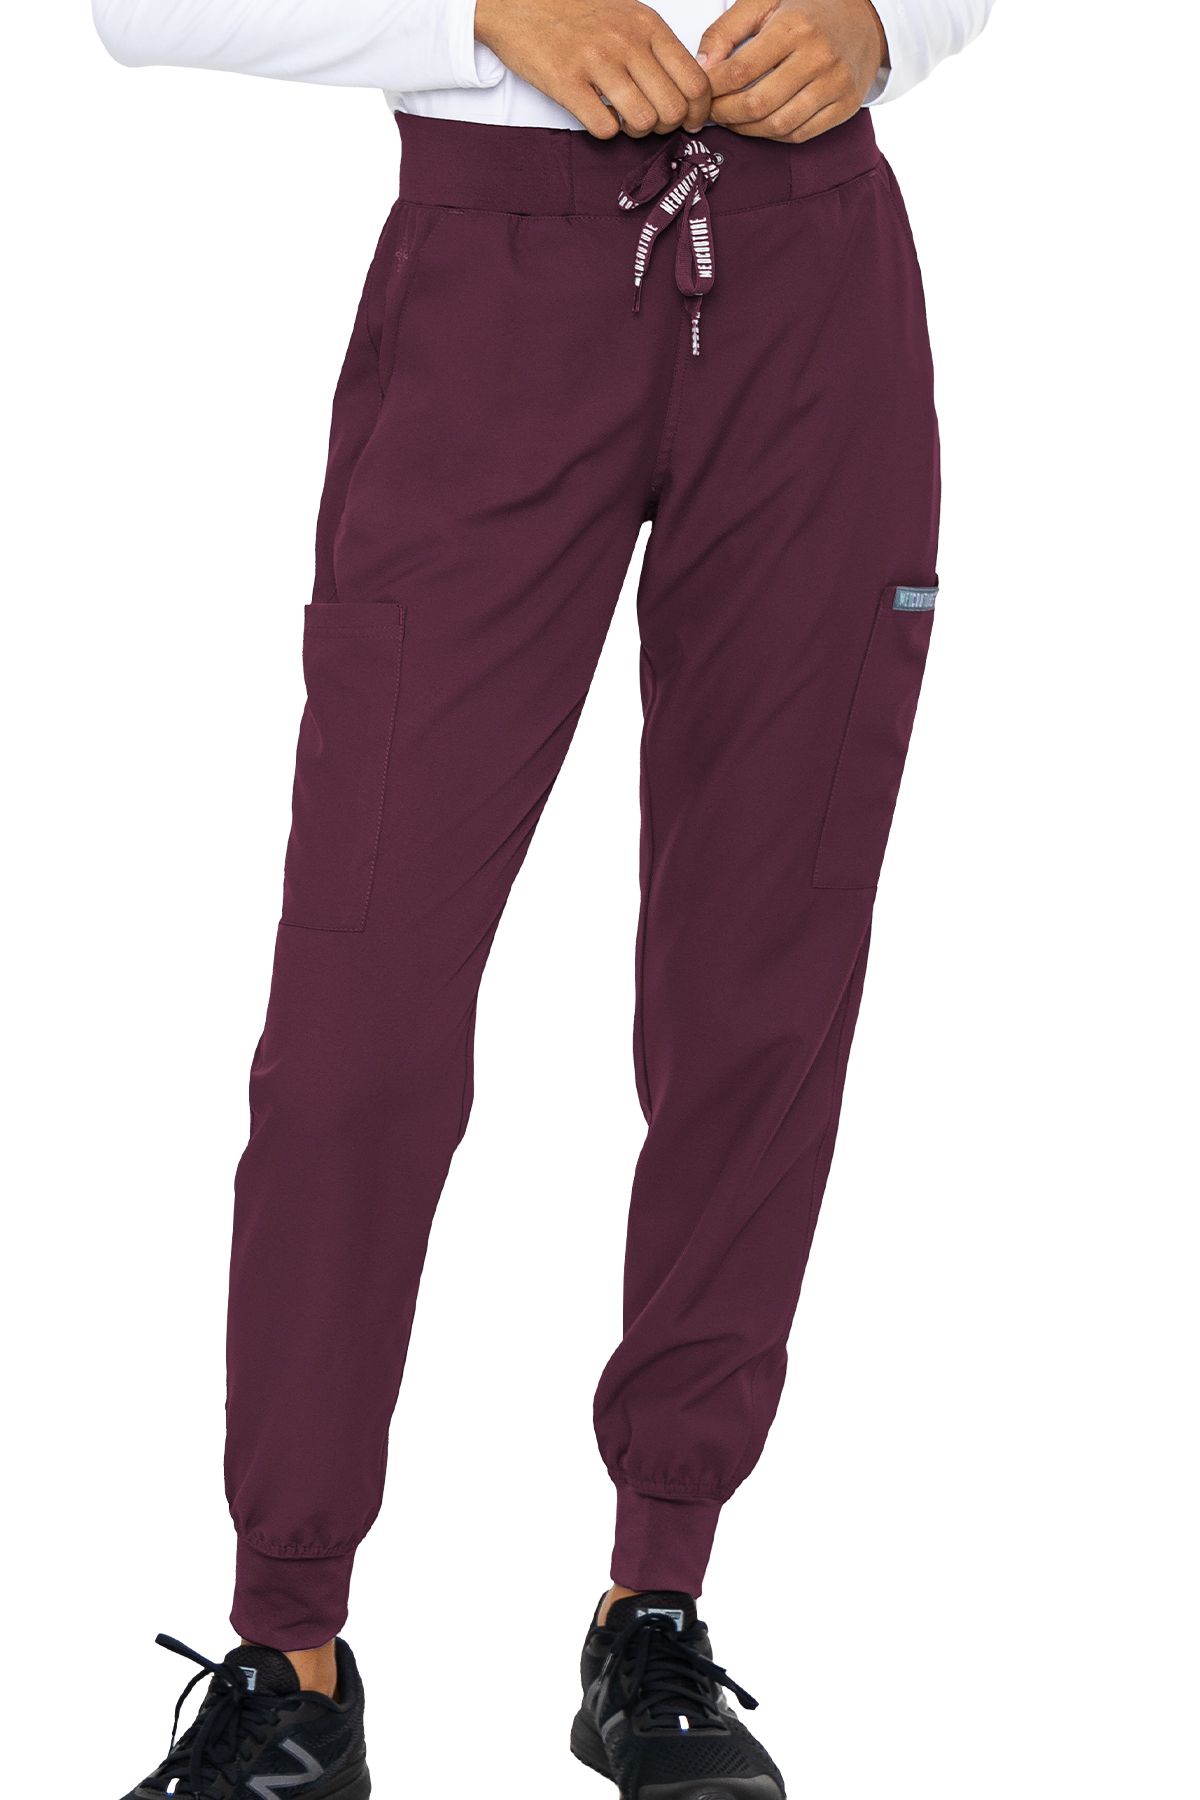 Buy Med Couture Insight 2711 Jogger - Insight Online at Best price - GA